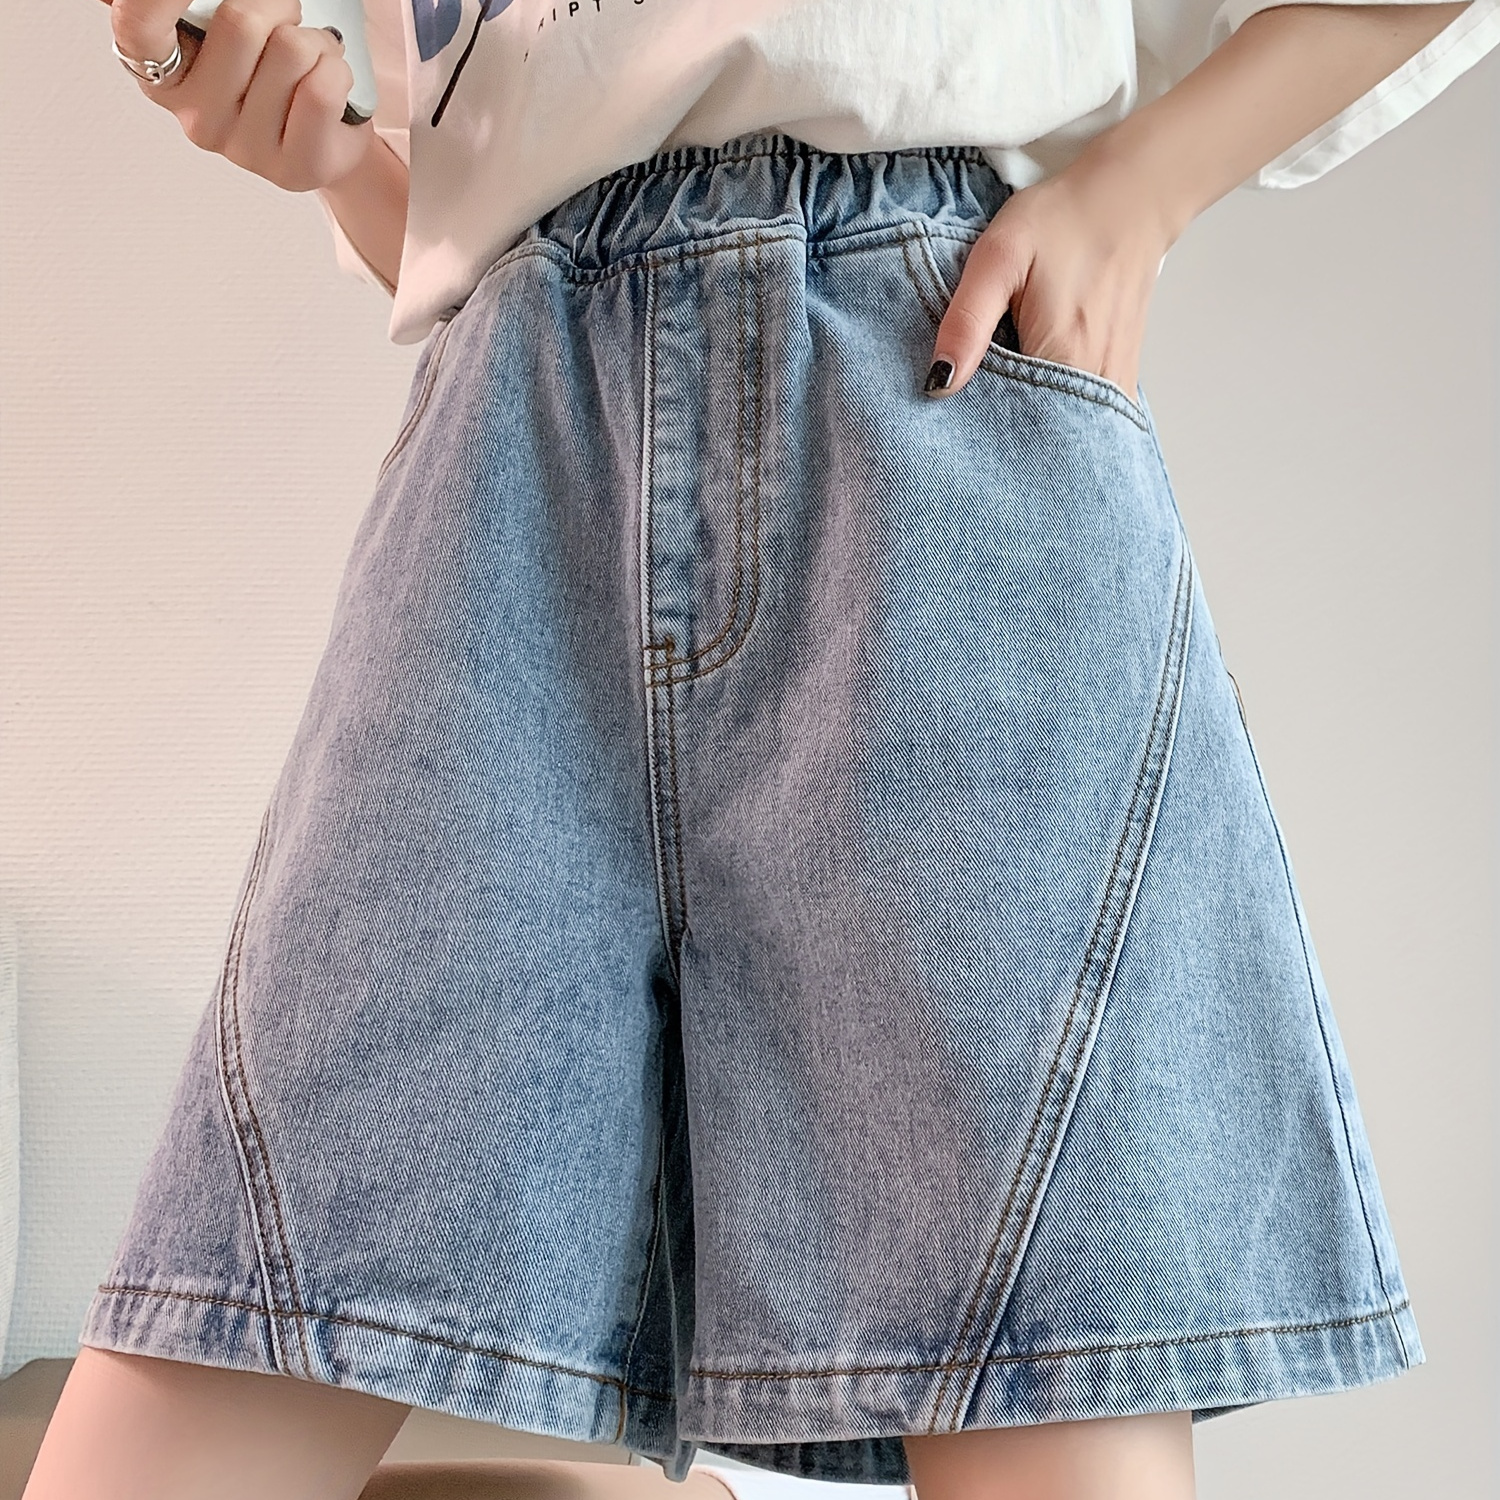 

Women's Plus Size High Waisted A-line Denim Shorts For Summer With Pockets, Elastic Waist Wide Leg Loose Jean Shorts For Women, Casual Blue Color Comfy Denim Bottoms, Women's Clothing